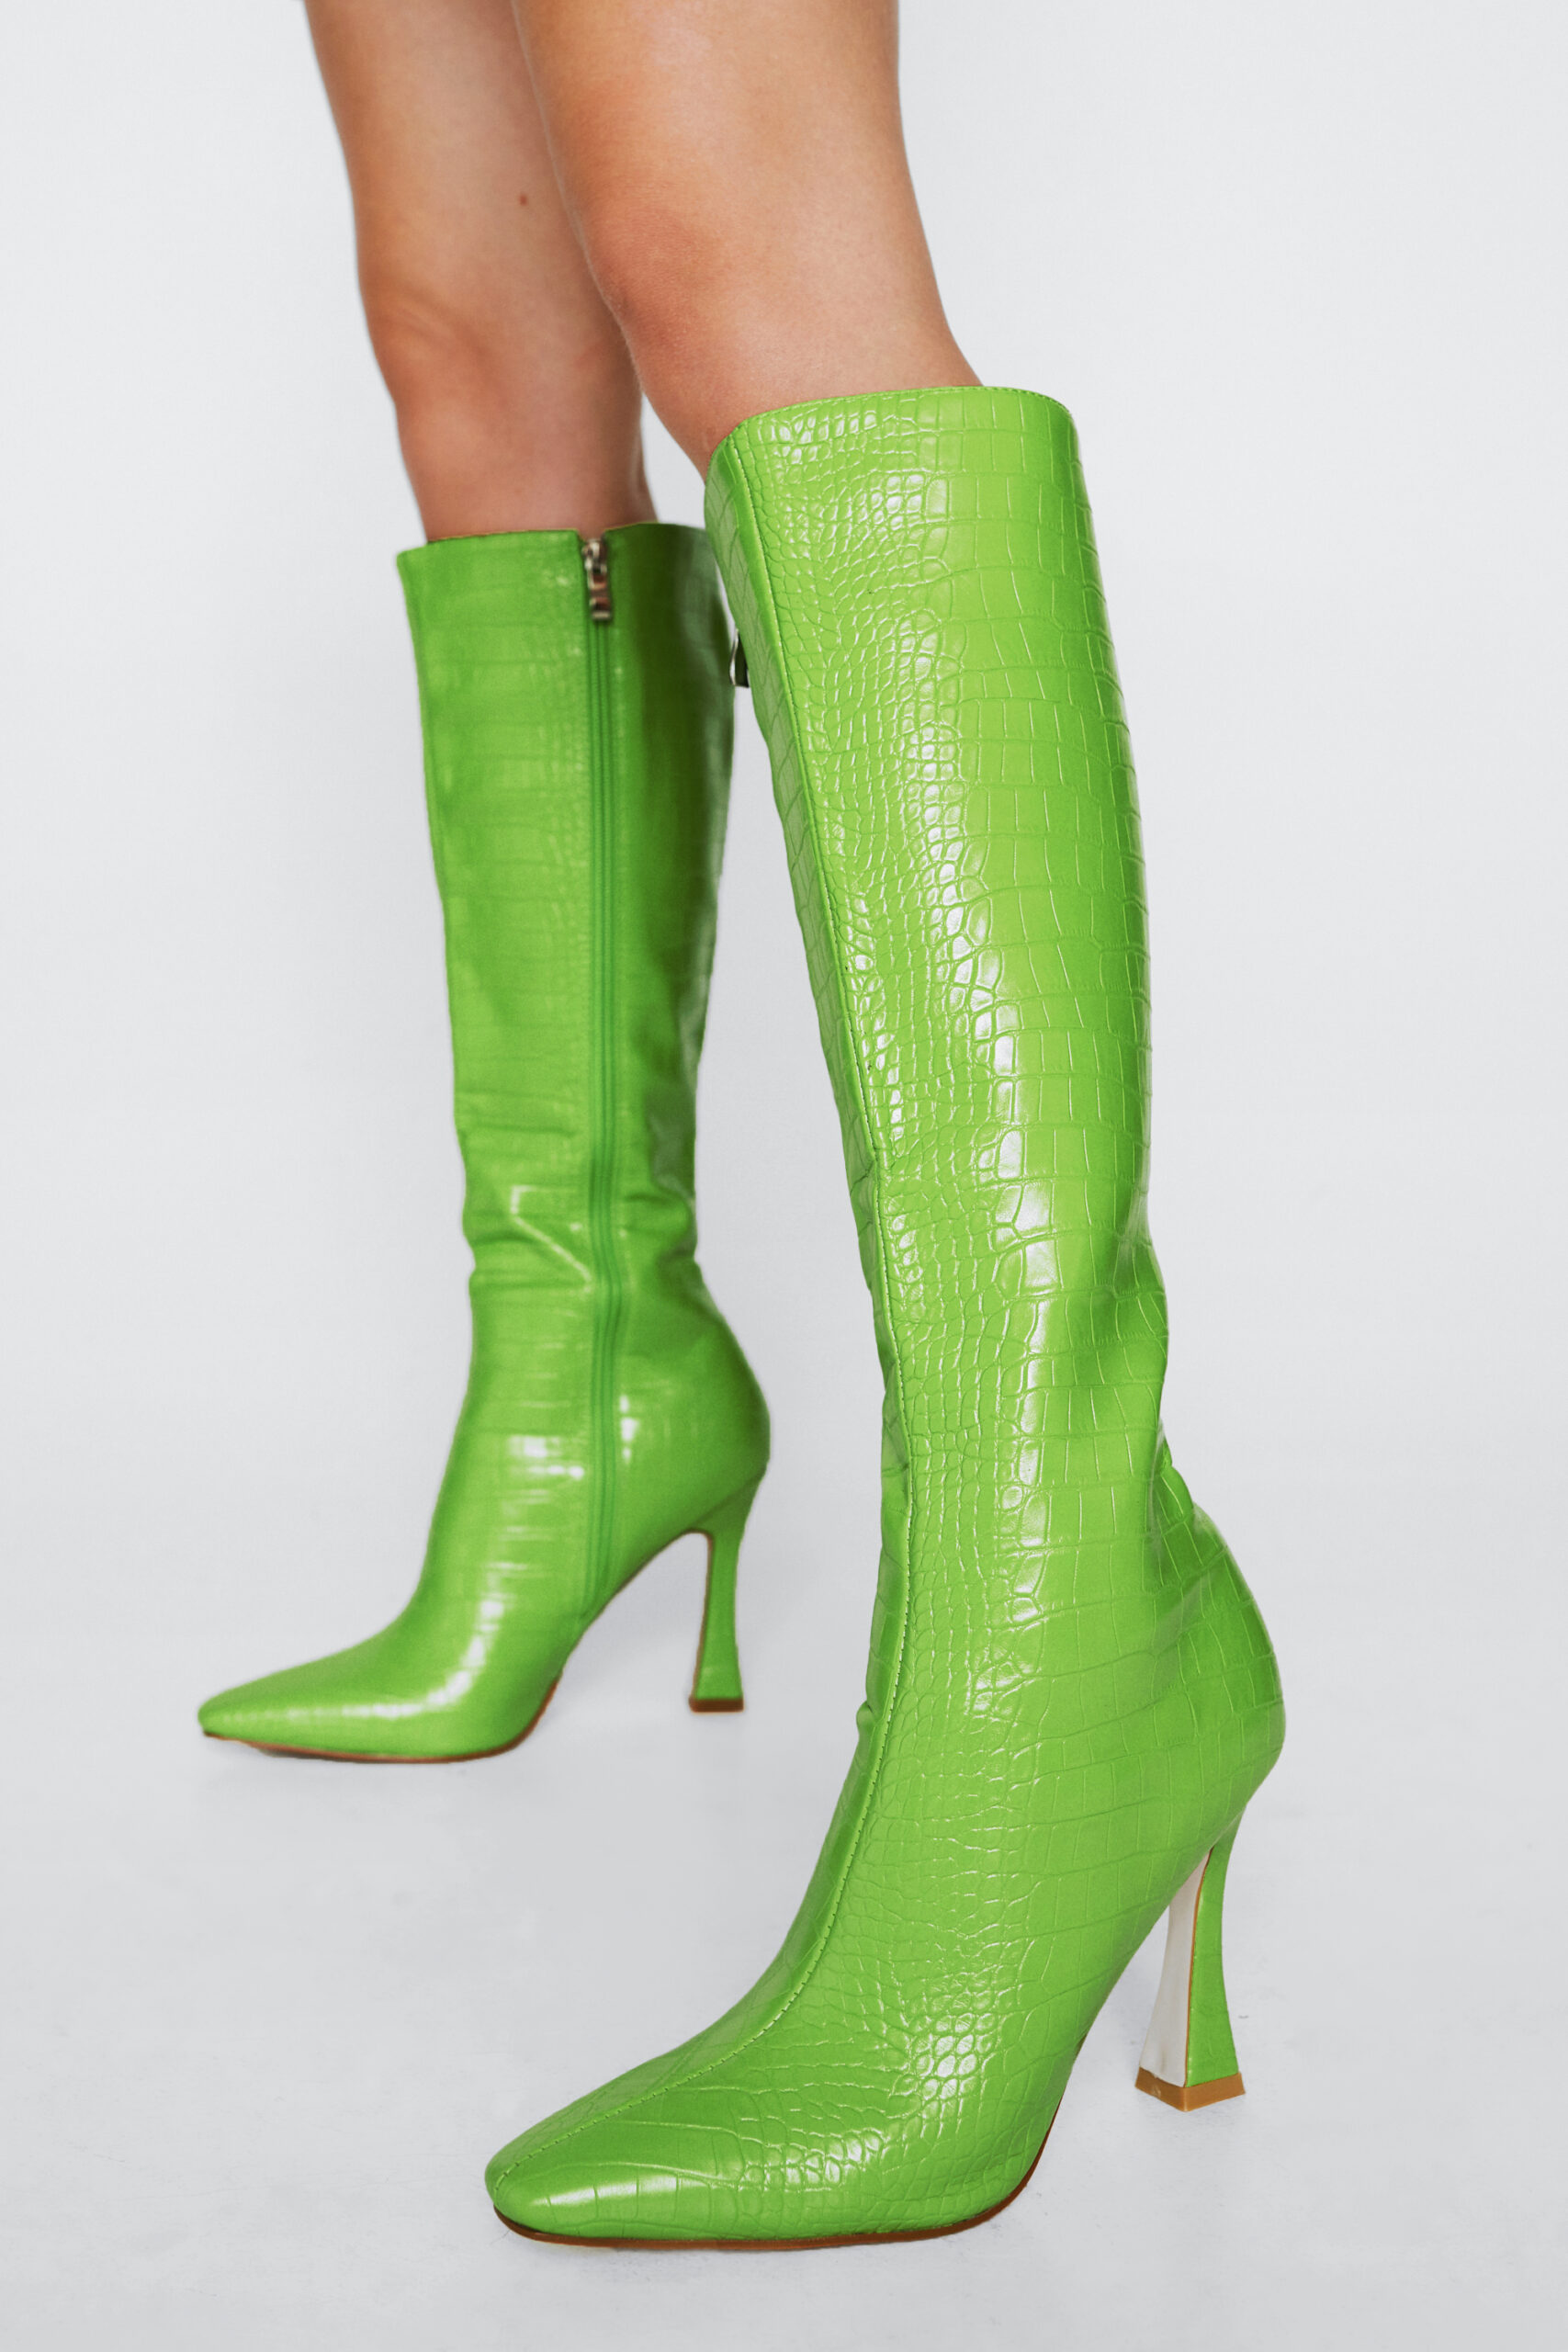 Faux Leather Crocodile Knee High Boots 